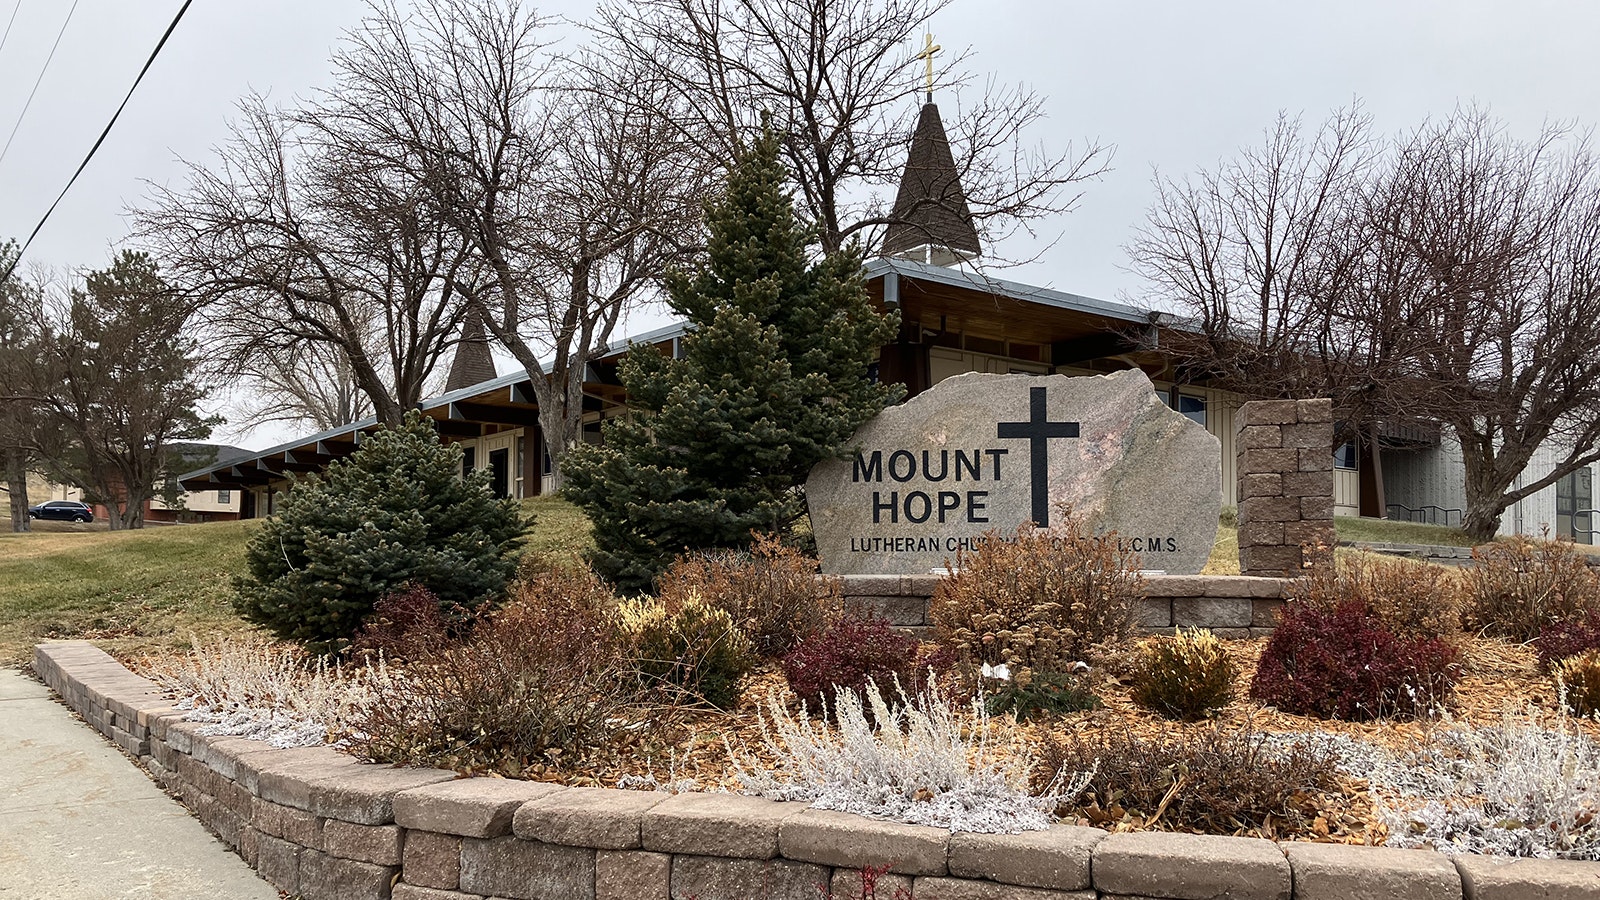 A new Lutheran Classical College is planned for Casper. It will be located next to Mount Hope Lutheran Church.